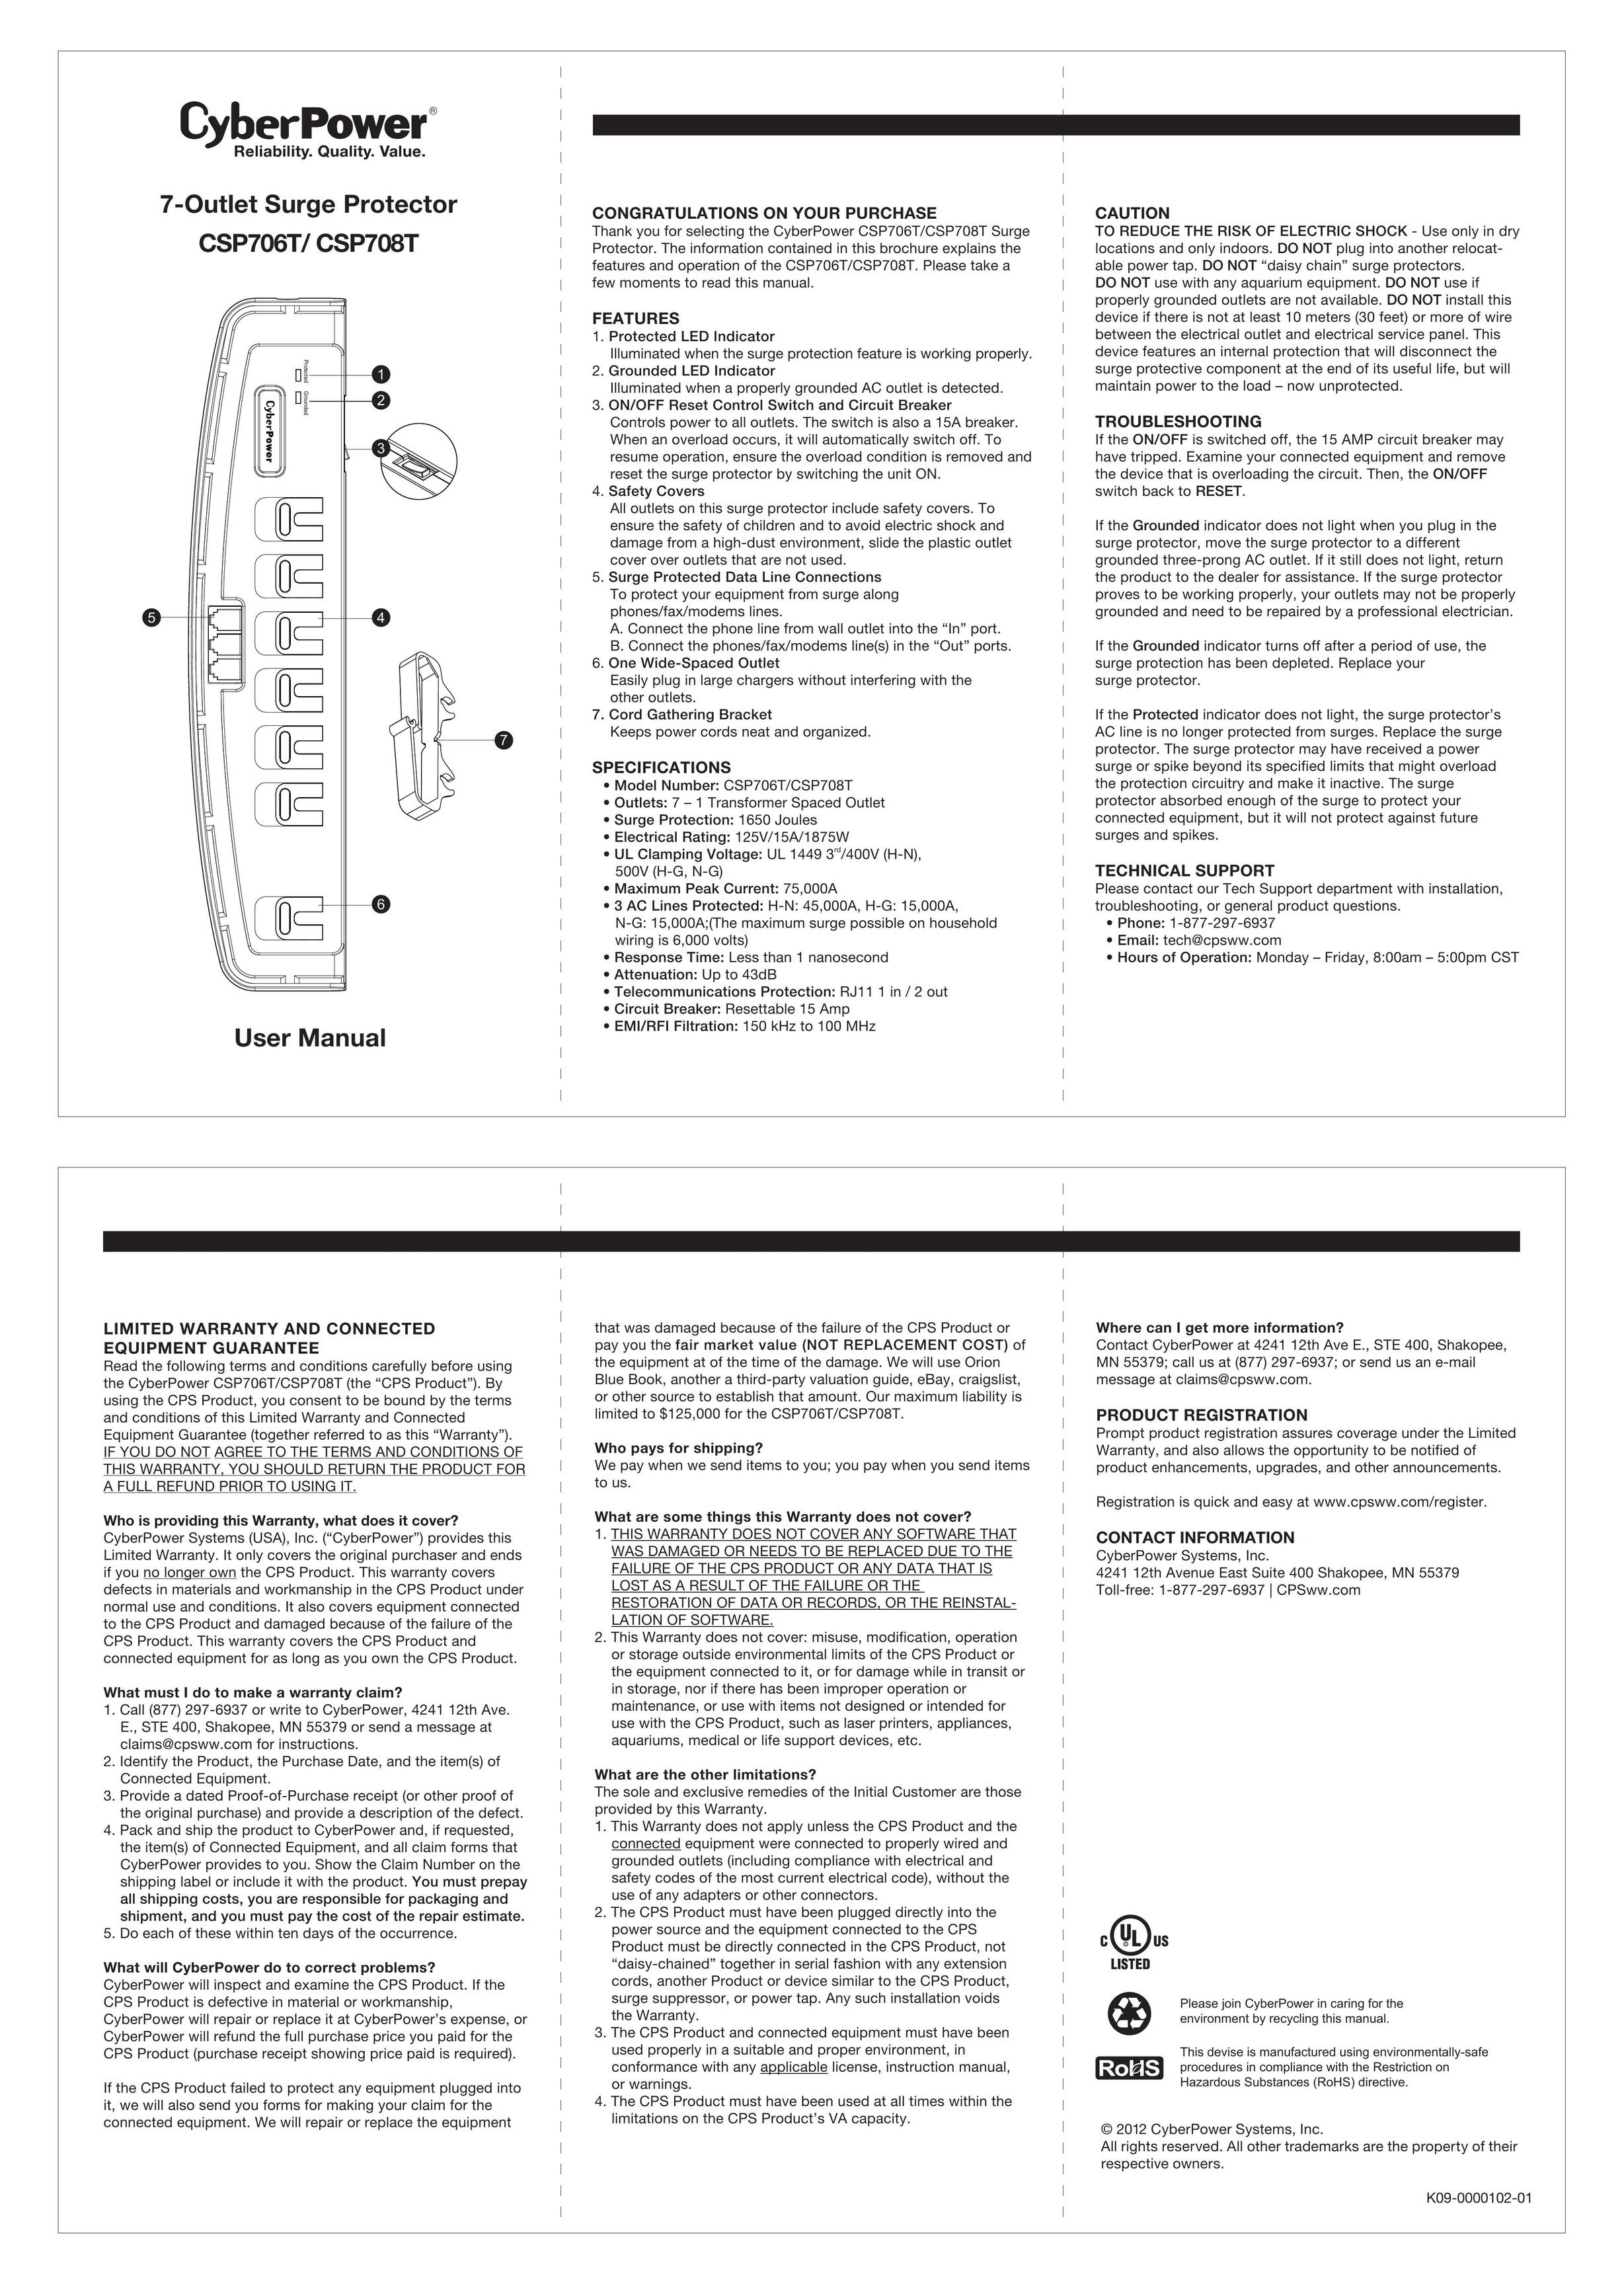 CyberPower CSP706T Surge Protector User Manual